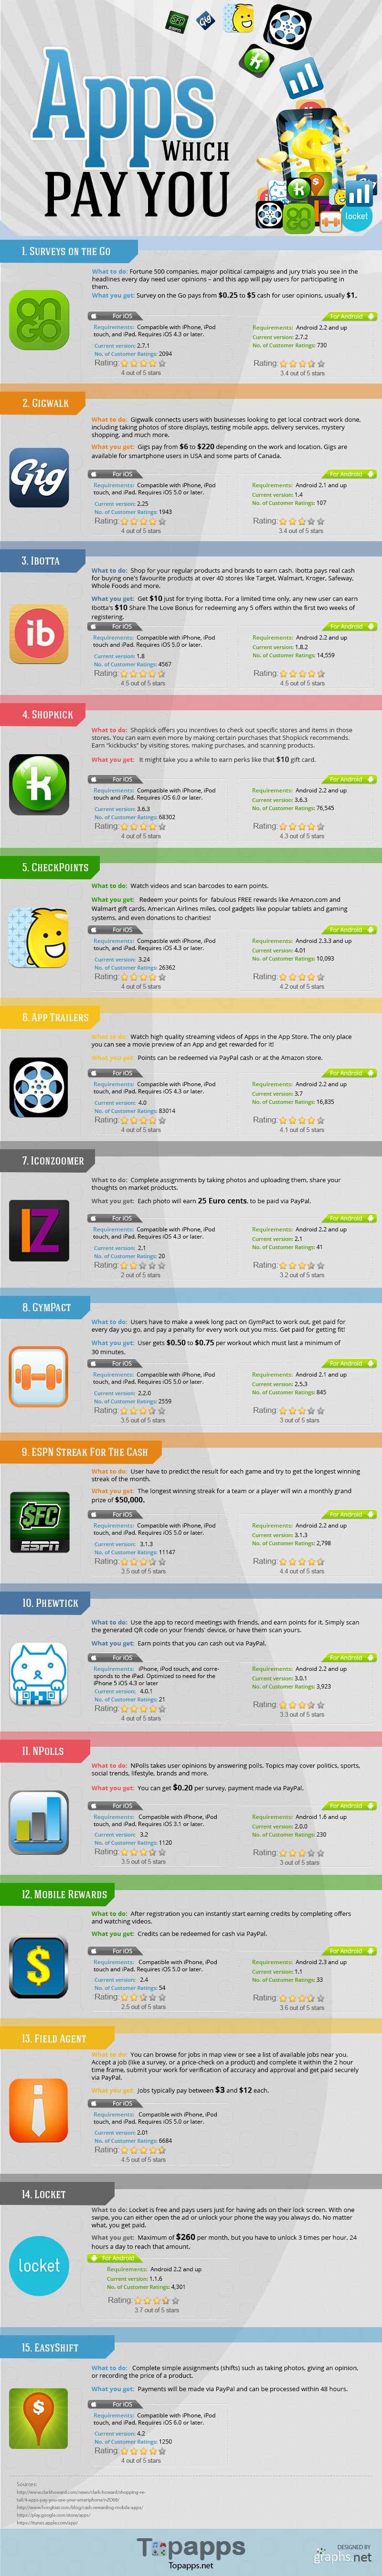 15 iPhone Apps That Pay You For Using Them [Infographic] | Bit Rebels